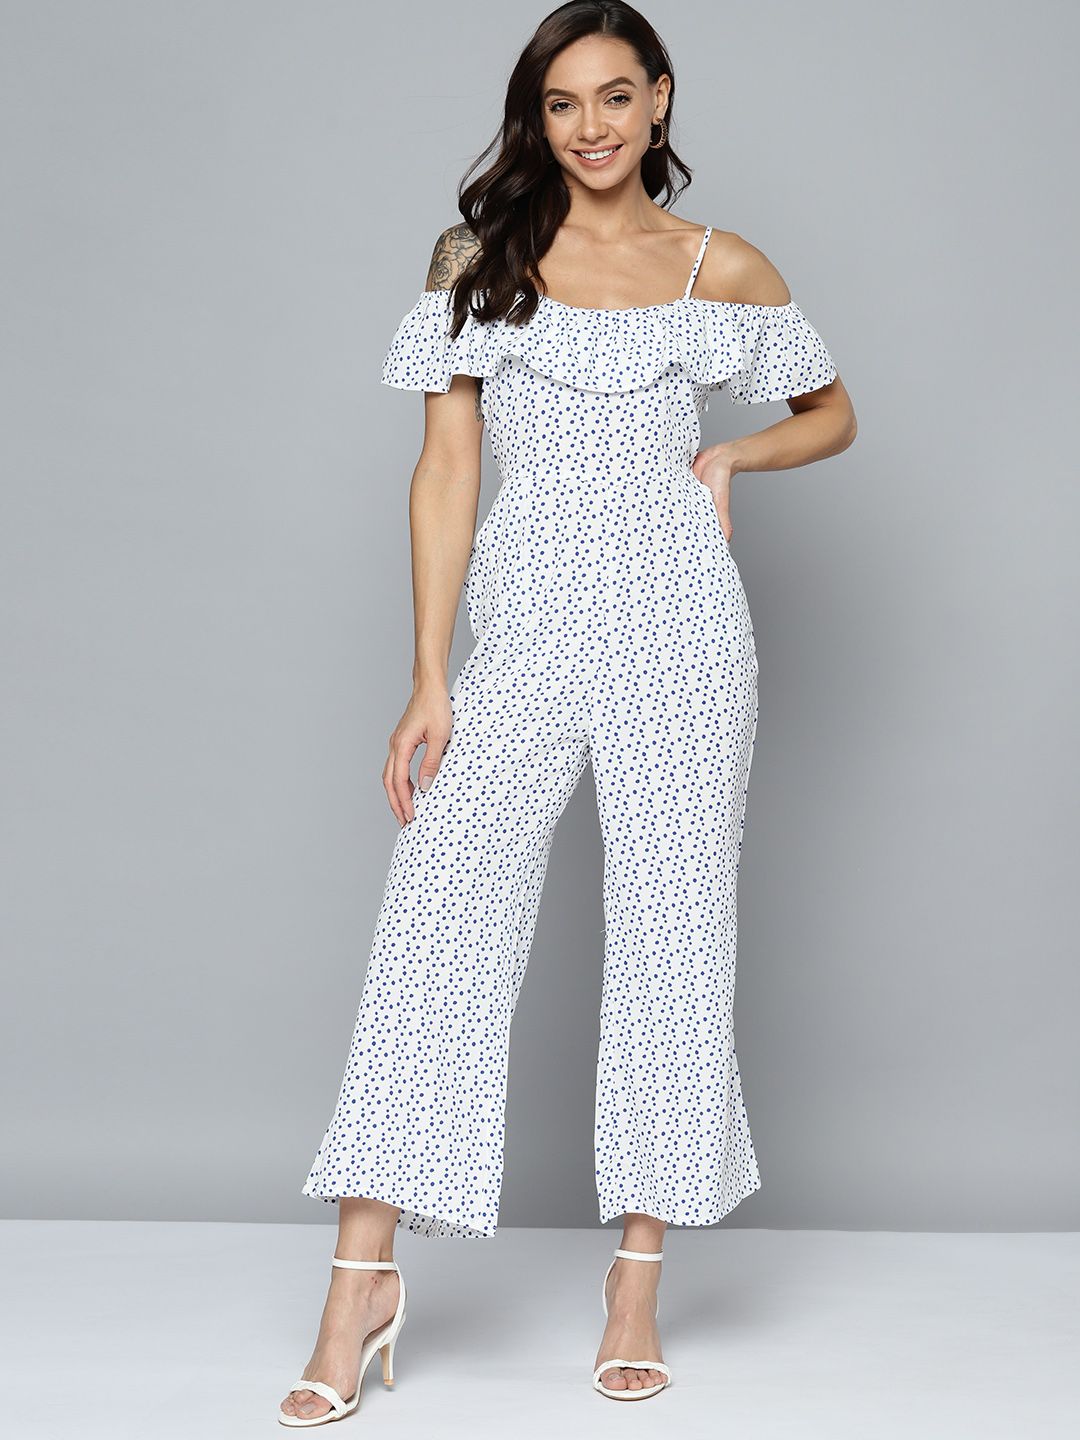 Mast & Harbour White & Blue Printed Ruffled Basic Jumpsuit Price in India